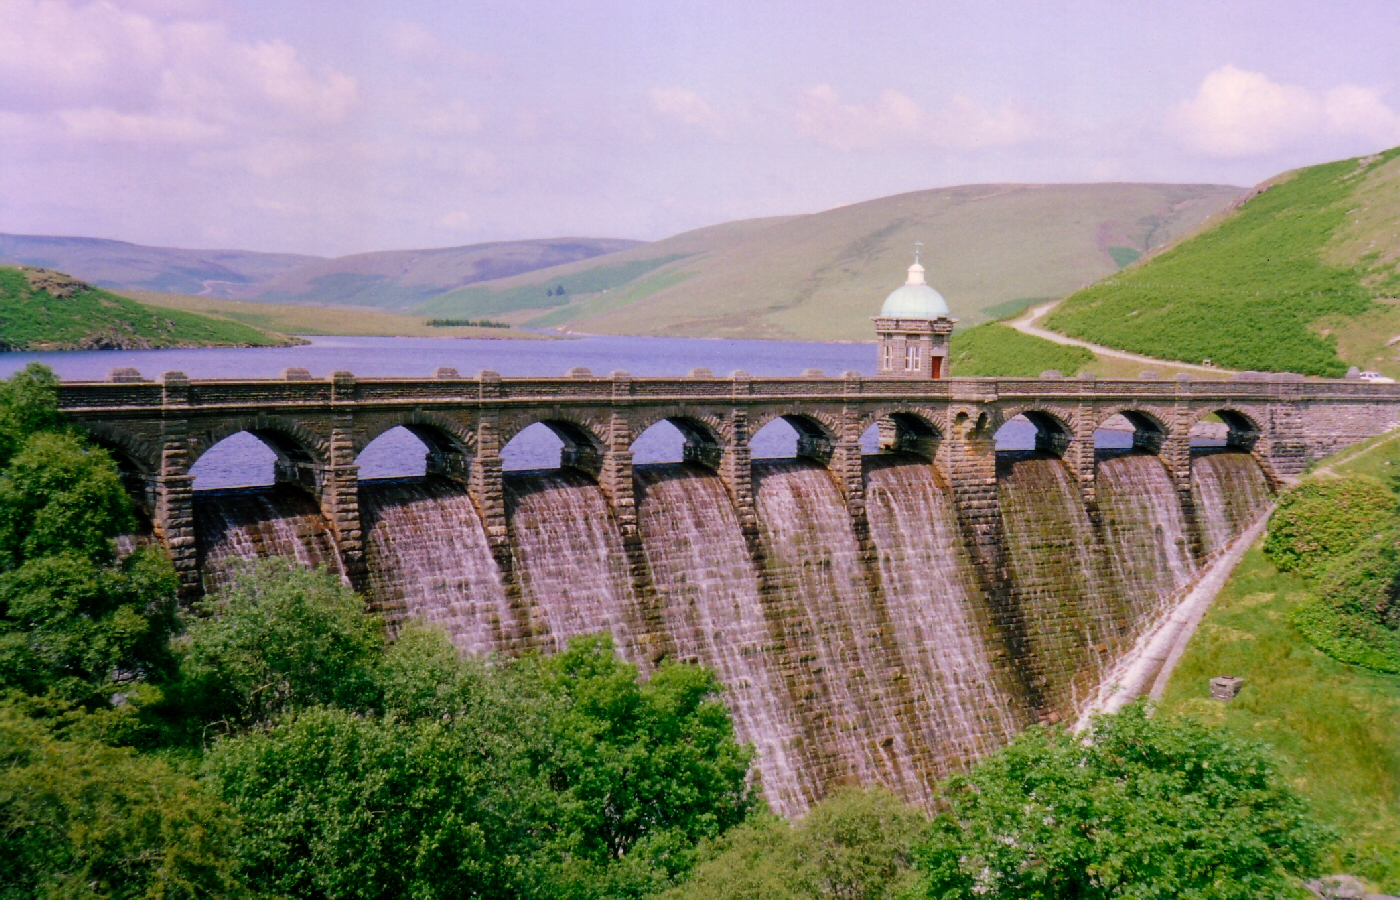 * Classic Cymru - Elan Valley - Craig Goch dam again, this time in glorious sunshine, with the water from the reservoir barely trickling over the top - Summer 1992 (by AJW) *